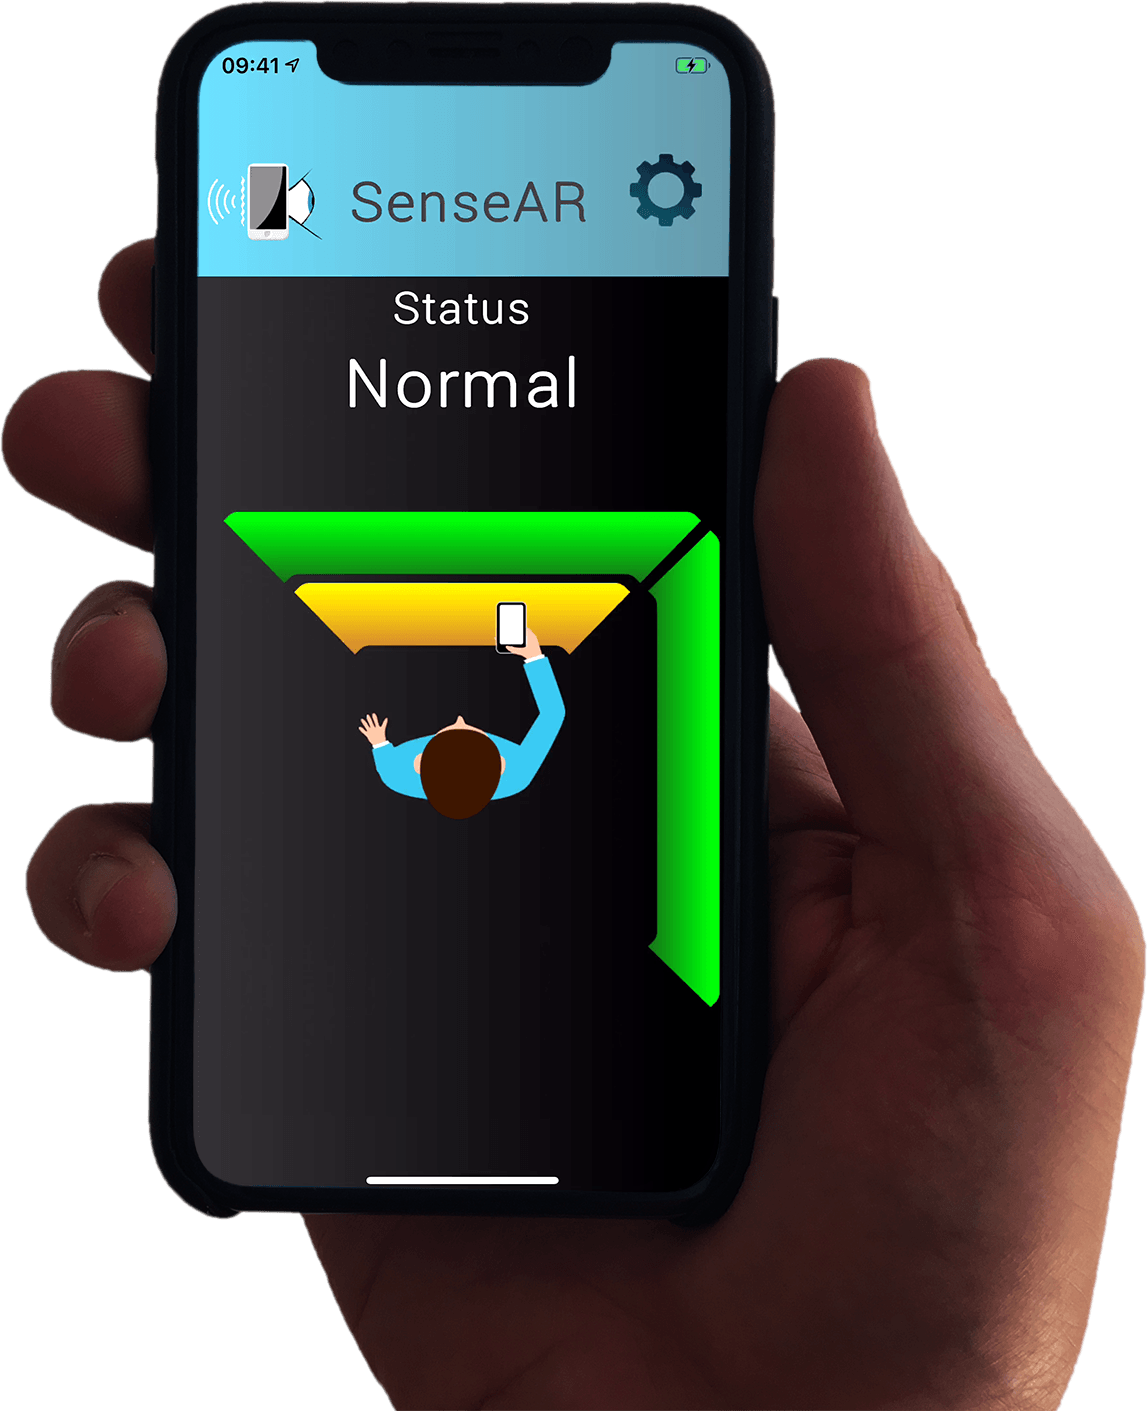 Image of SenseAR Running on an iPhone